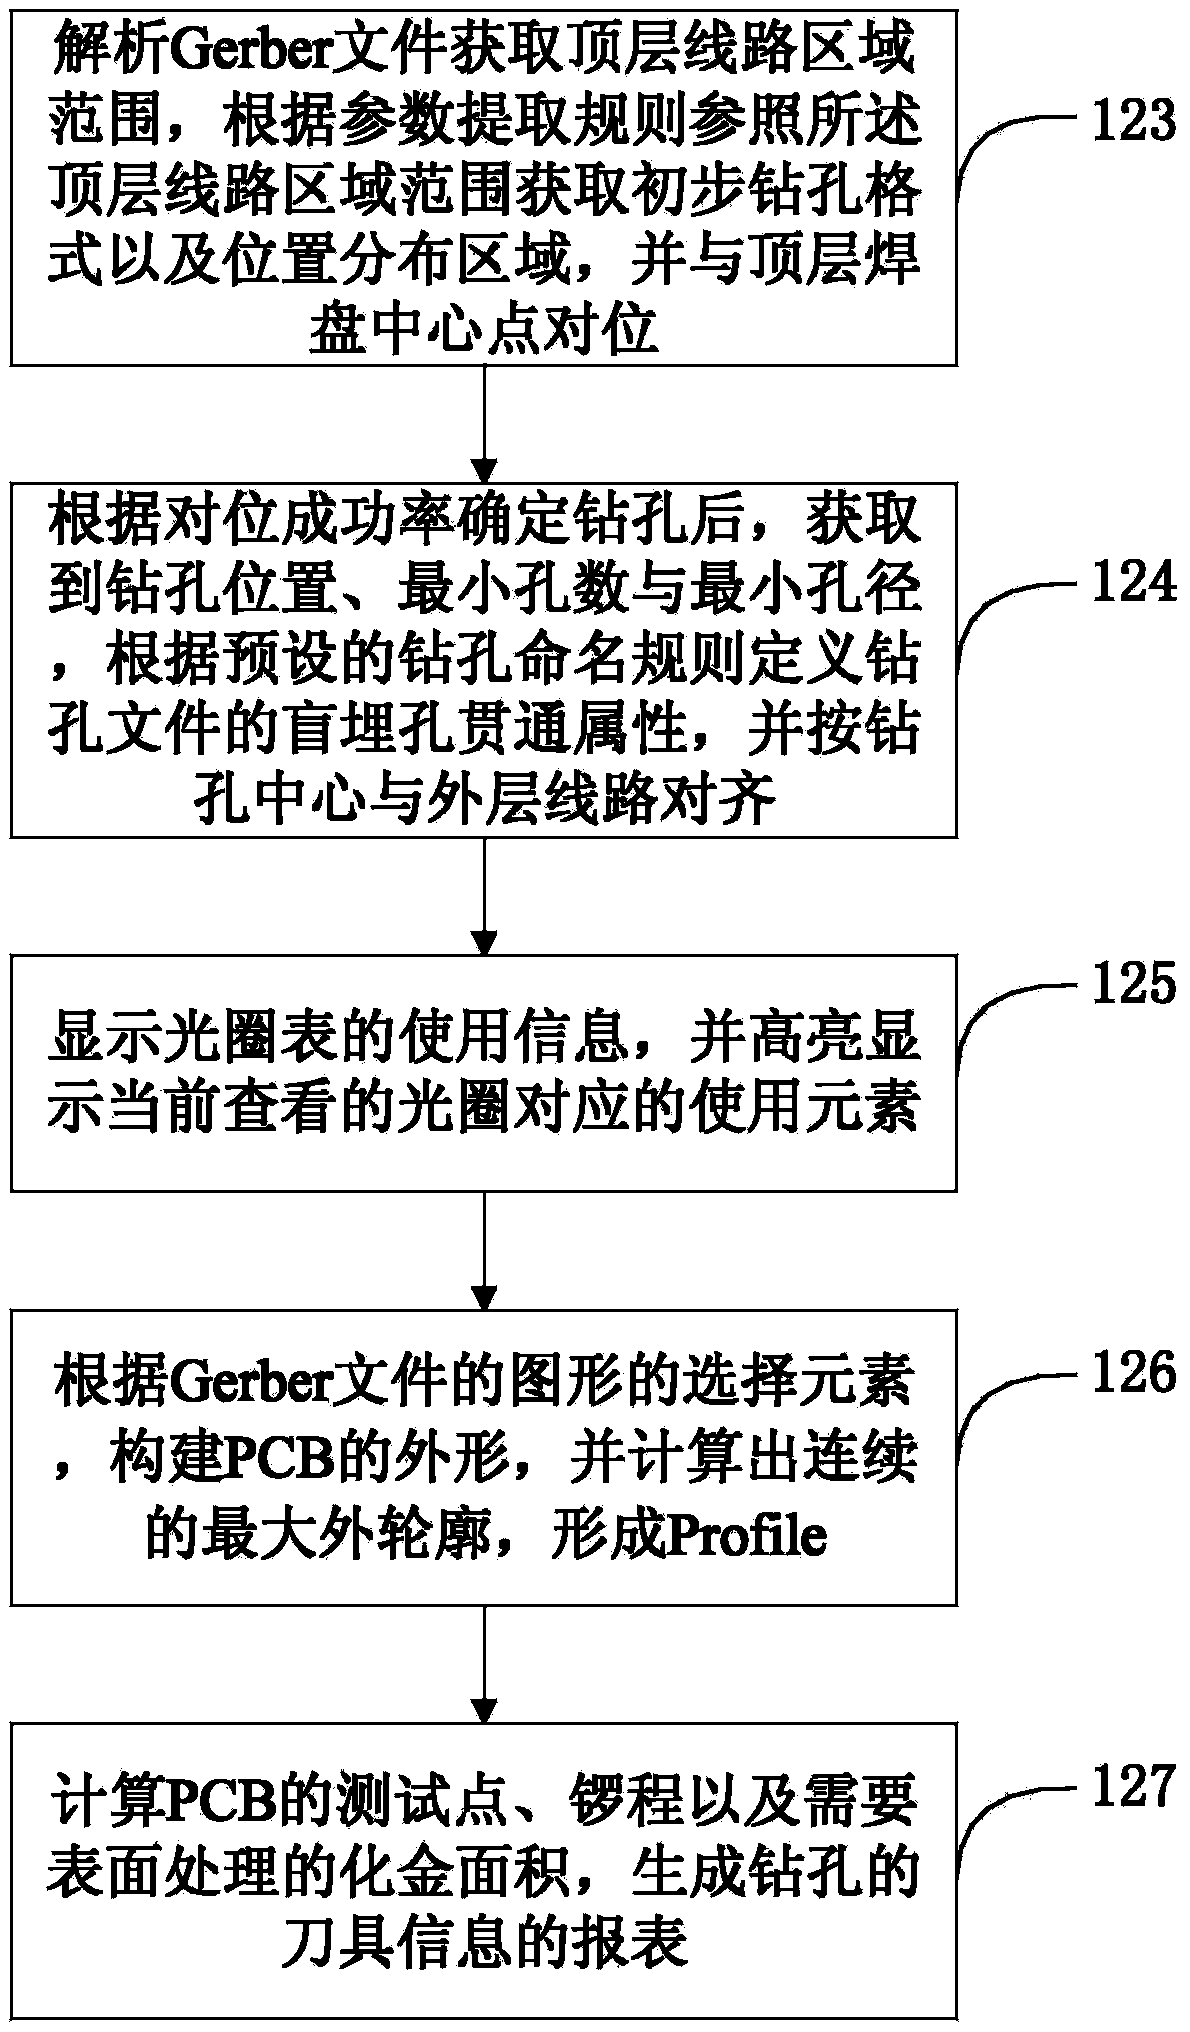 Method and system for automatically auditing PCB project files